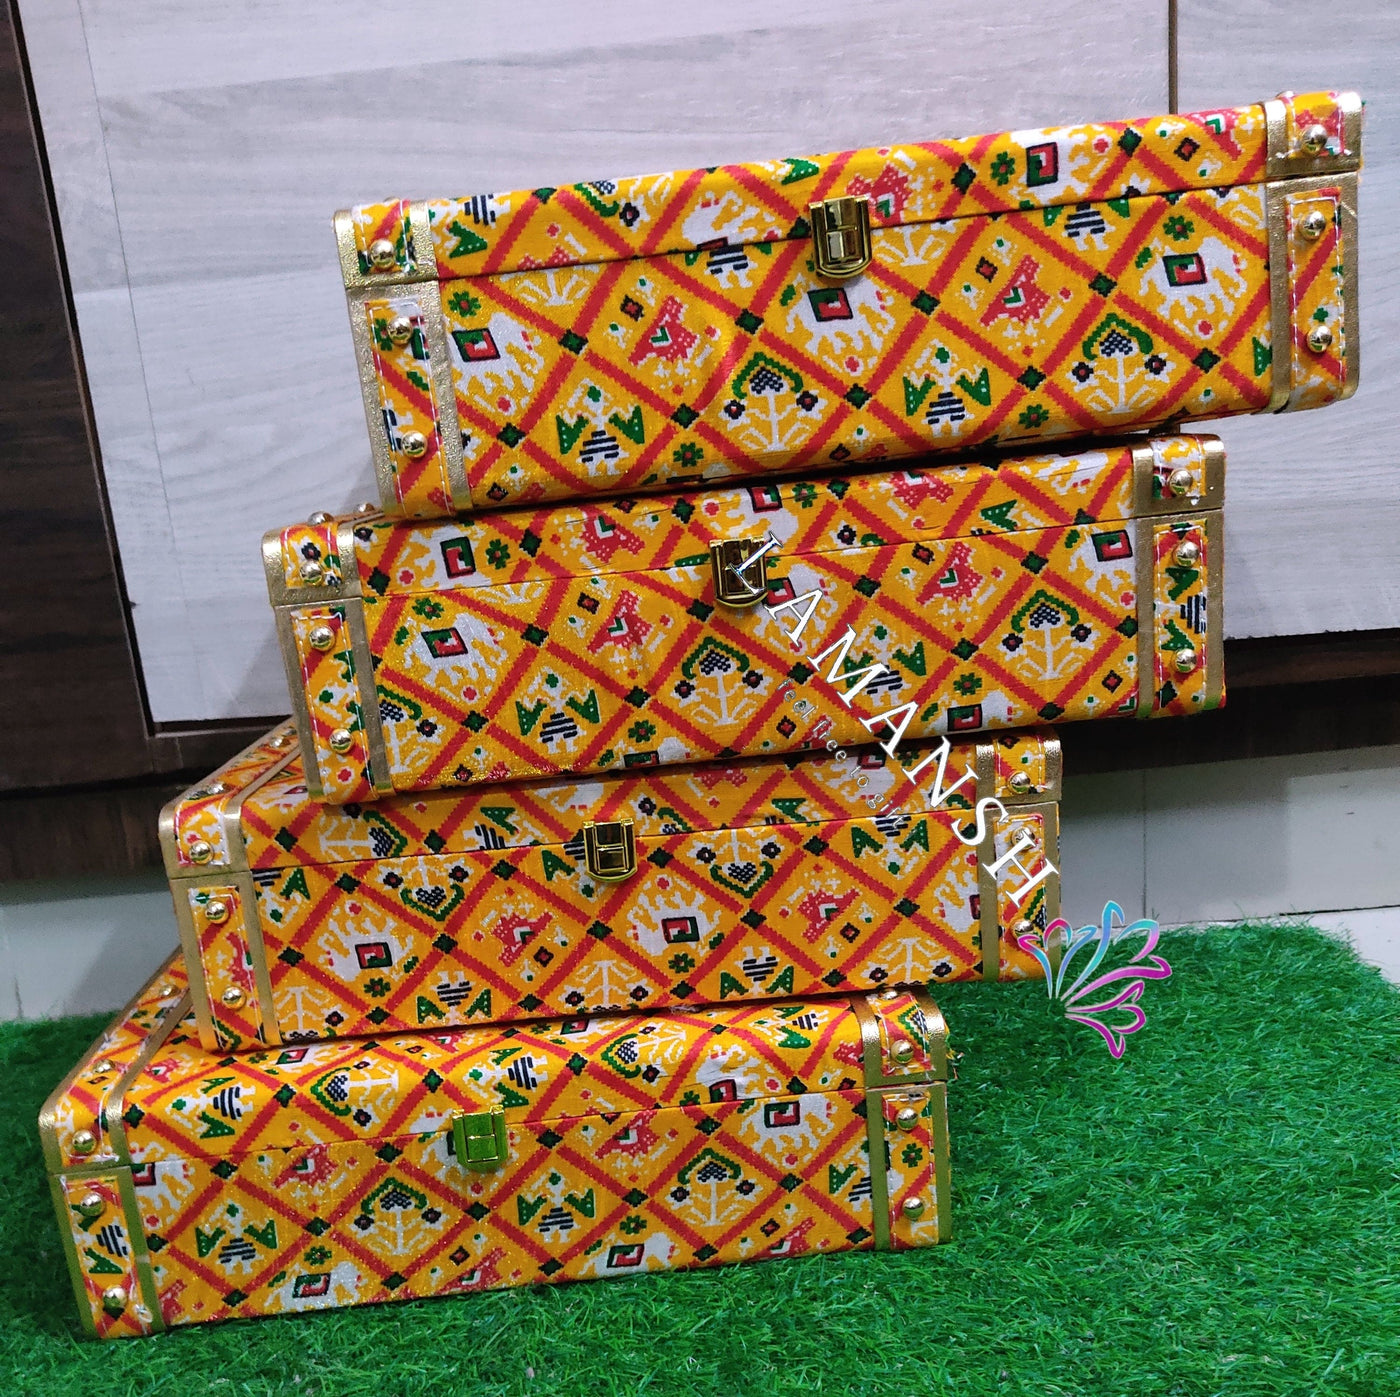 New Jaipur Handicraft gift trunk boxes LAMANSH® (New Size : 14*12*4 inch) leatherette Patola Print Trunk boxes for Gifting 🎁 in wedding ceremony , birthday | Mdf Trunks for keeping Lehenga & Favors for Guests